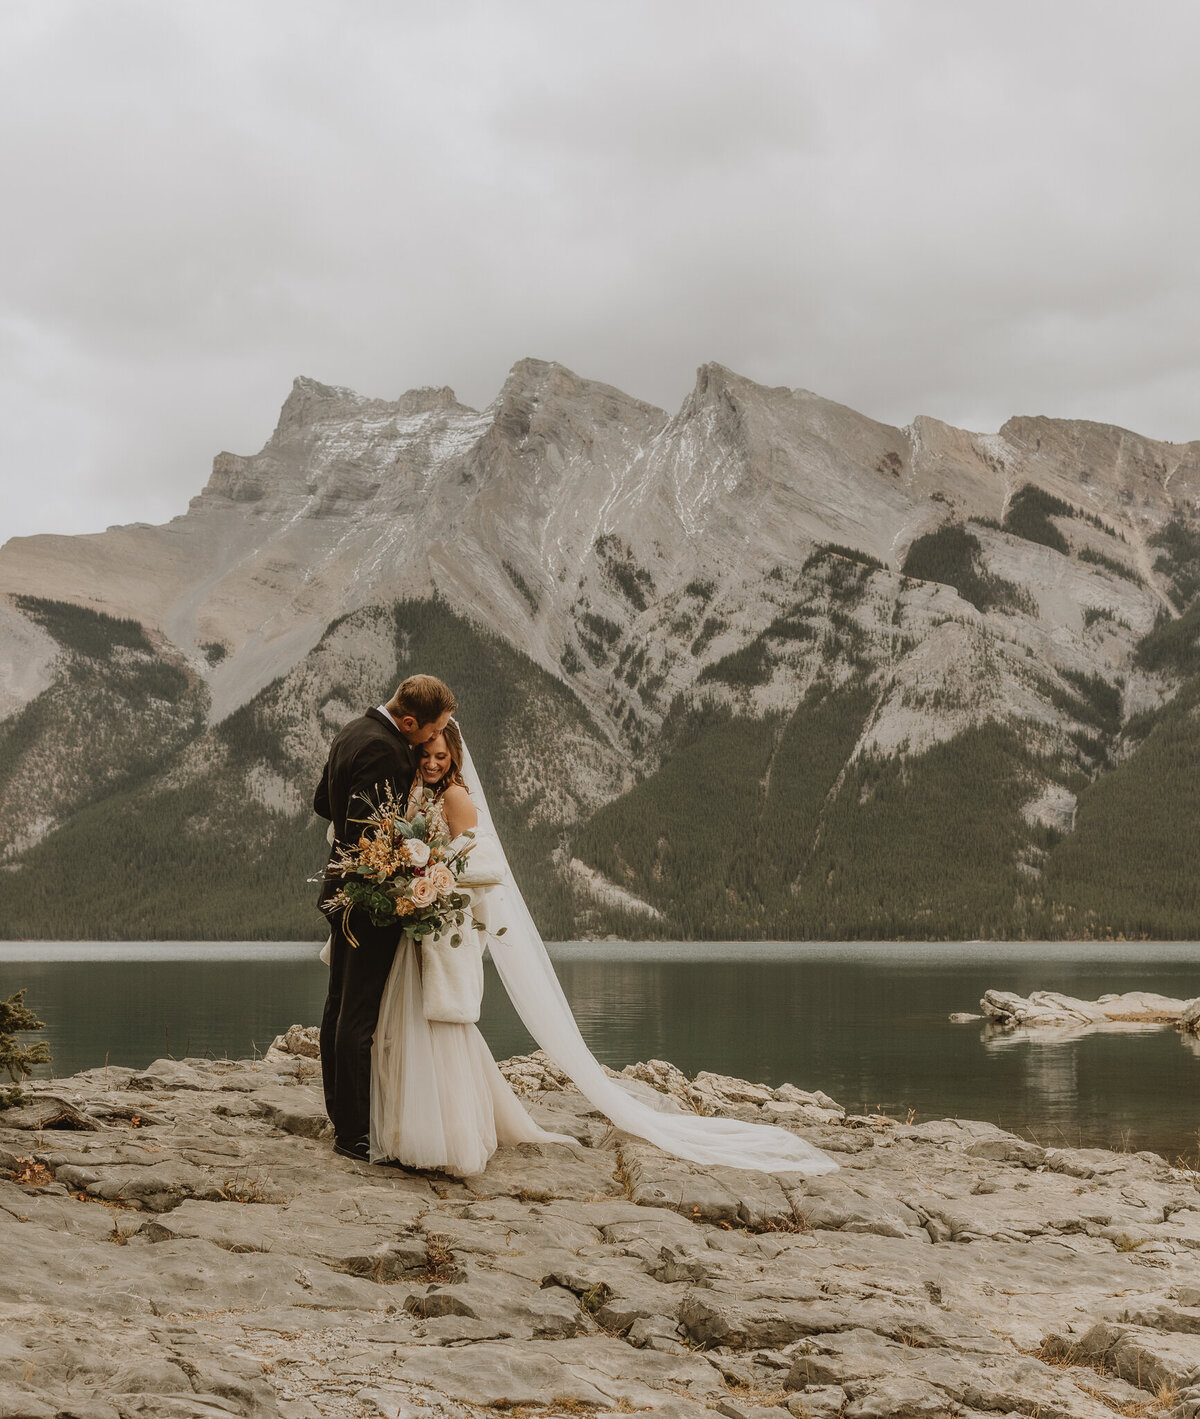 Couple snuggling by lake louise mountains in Banff, AB